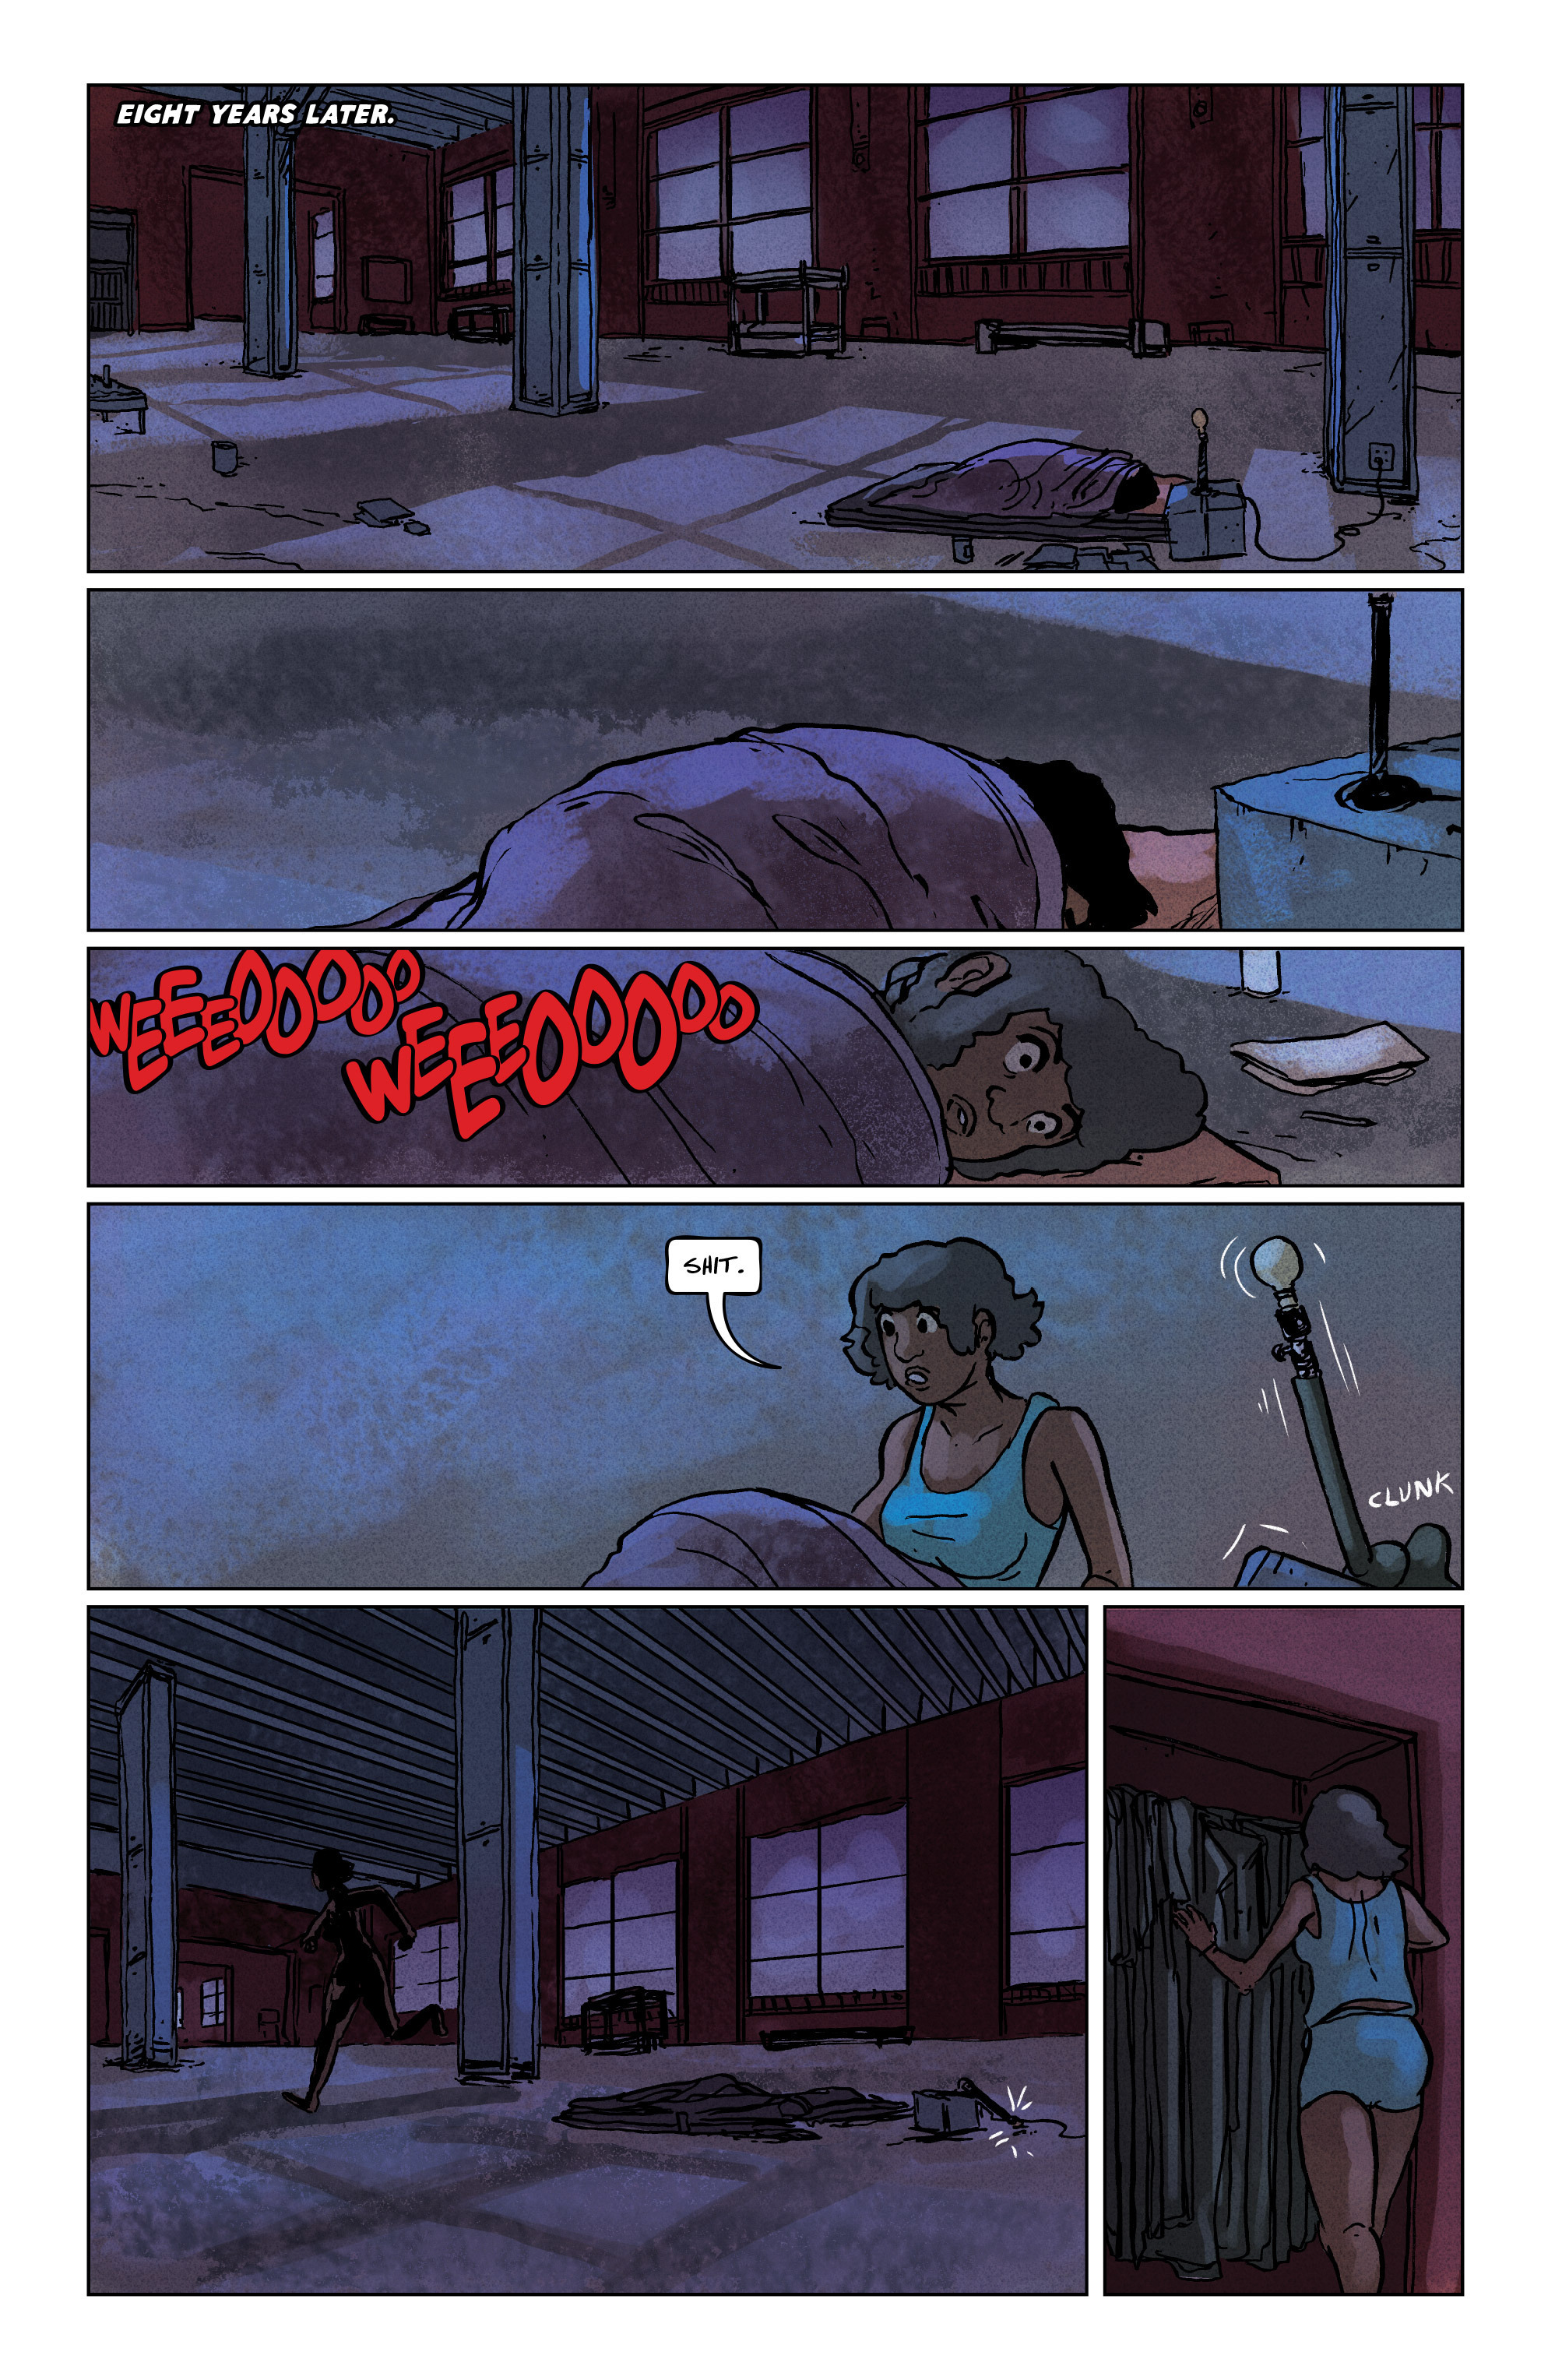 Exodus: The Life After (2015-): Chapter 6 - Page 3